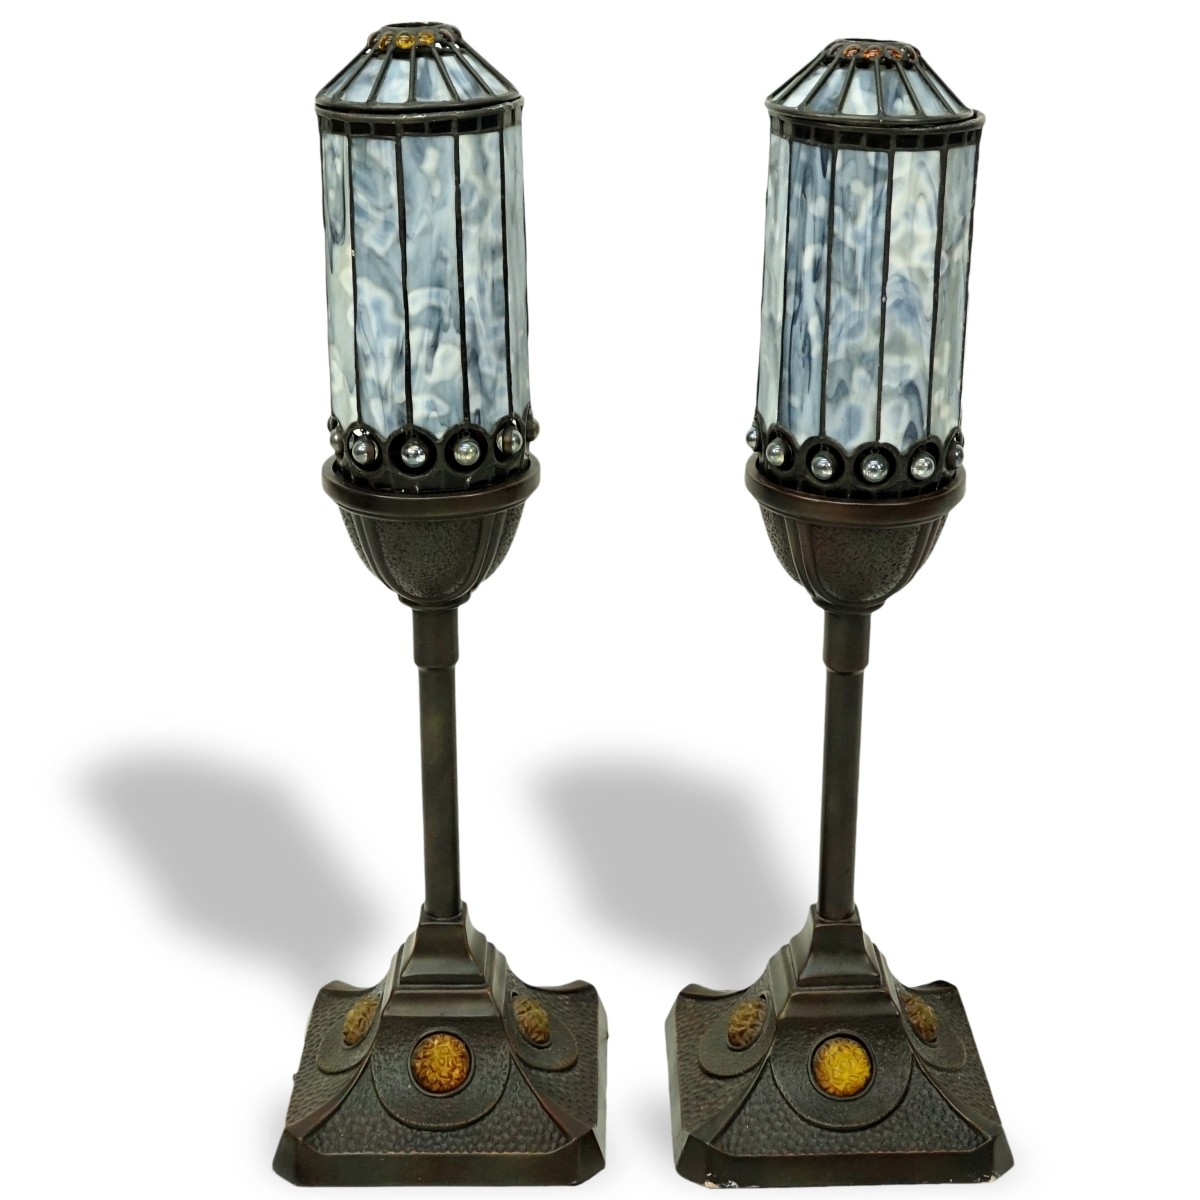 Pair Of Quoizel Inc Lamps With Leaded Glass Shades - Image 2 of 4